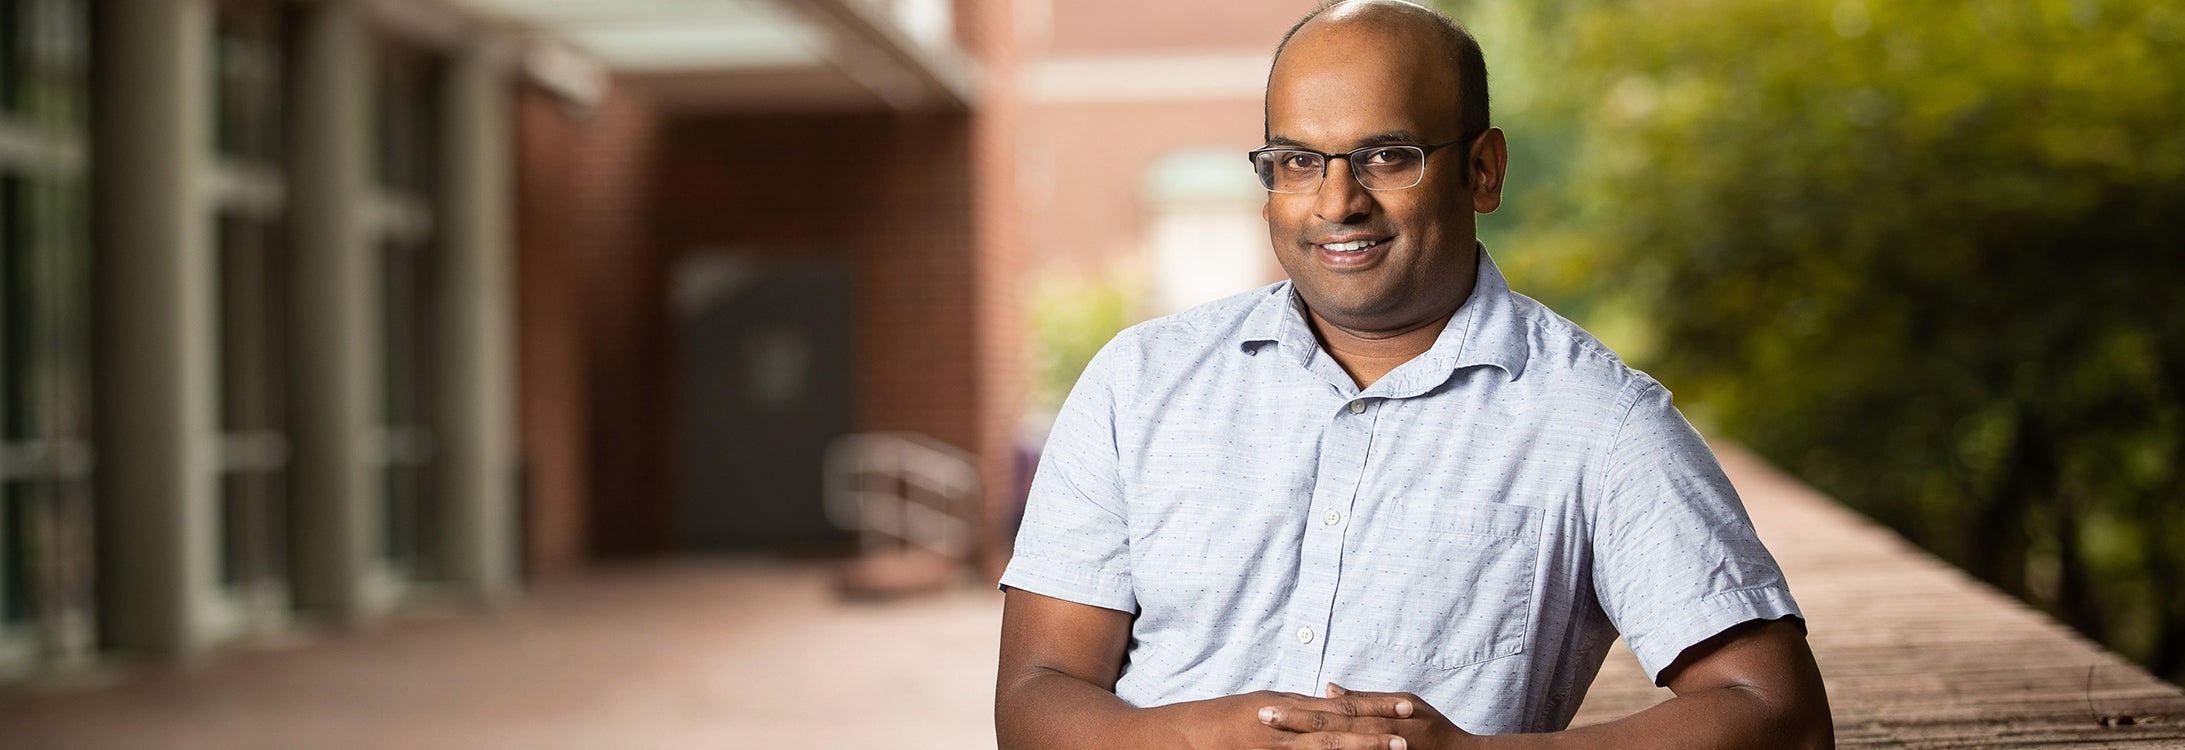 East Carolina University biology professor Chris Balakrishnan has been appointed as a temporary program director with the National Science Foundation’s Evolutionary Processes Cluster. The position allows Balakrishnan to make recommendations about which NSF research proposals to fund. (Photo by ECU)